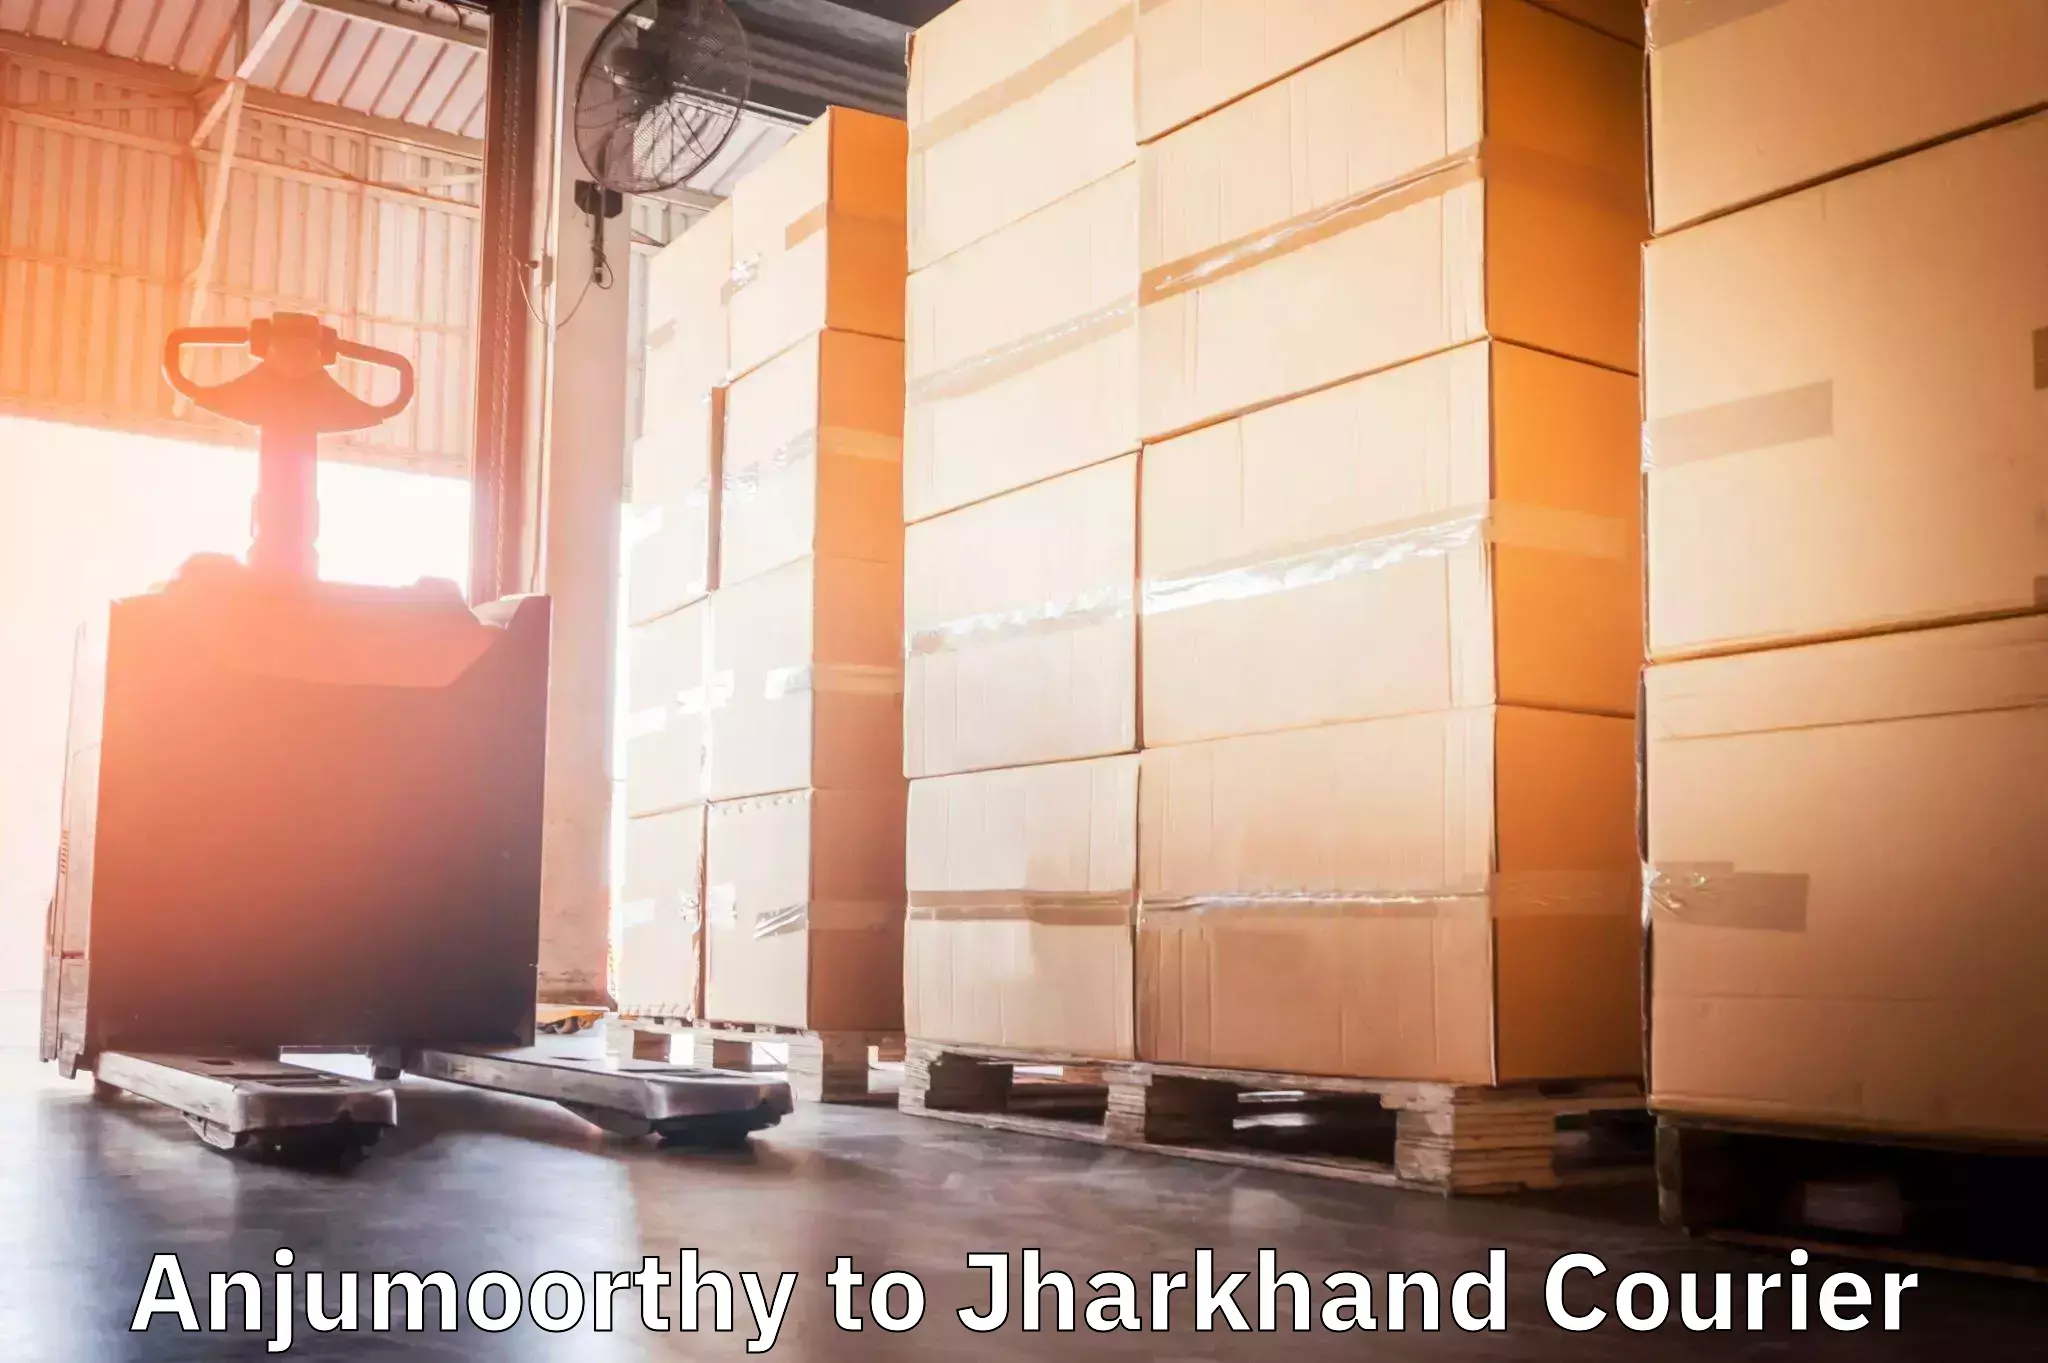 Optimized shipping services Anjumoorthy to Dhanbad